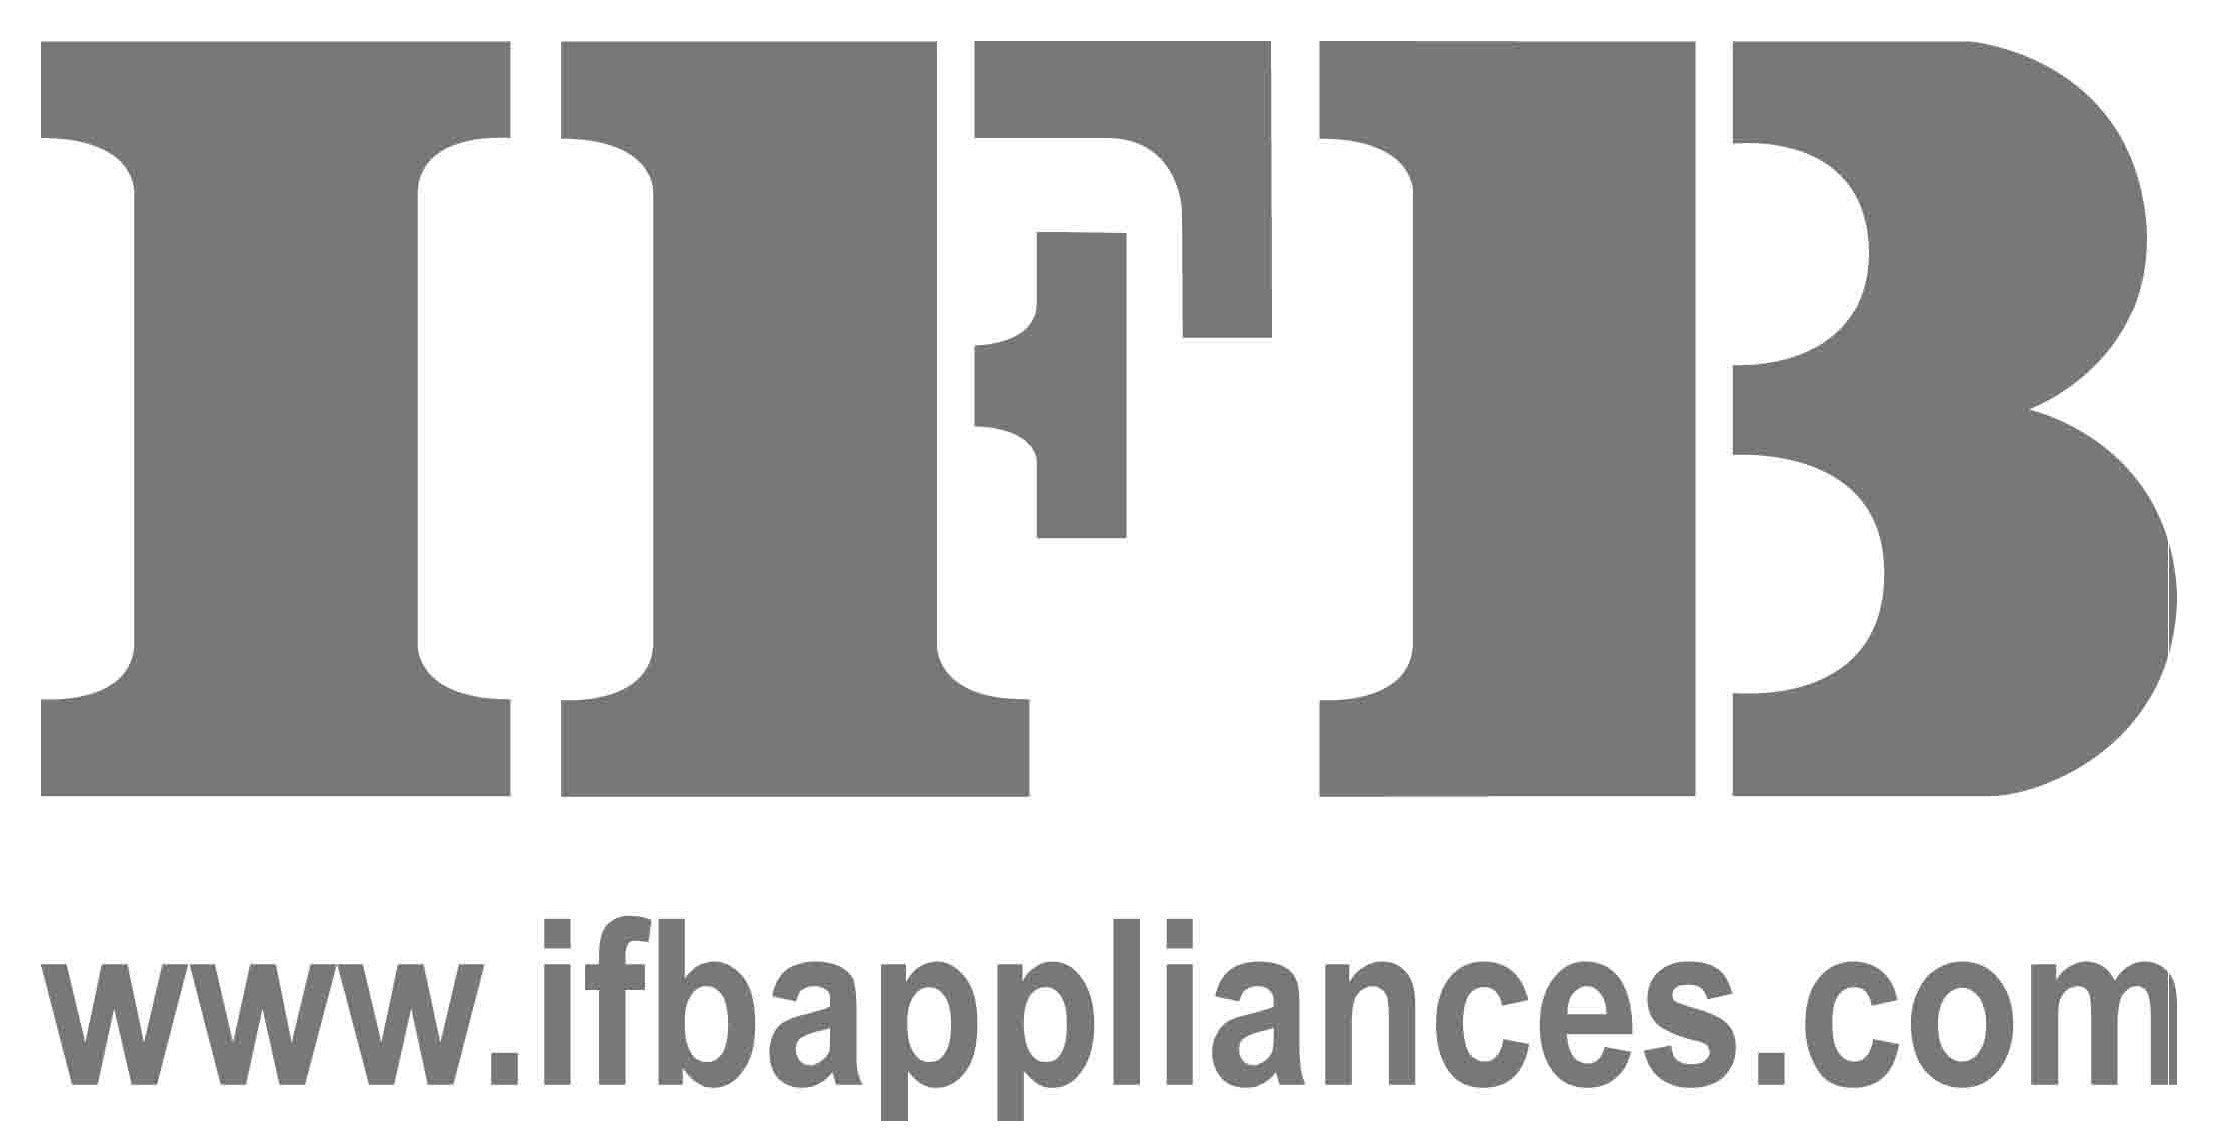 IFB Logo - File:Logo of IFB Industries Home Appliance Division.jpg - Wikimedia ...